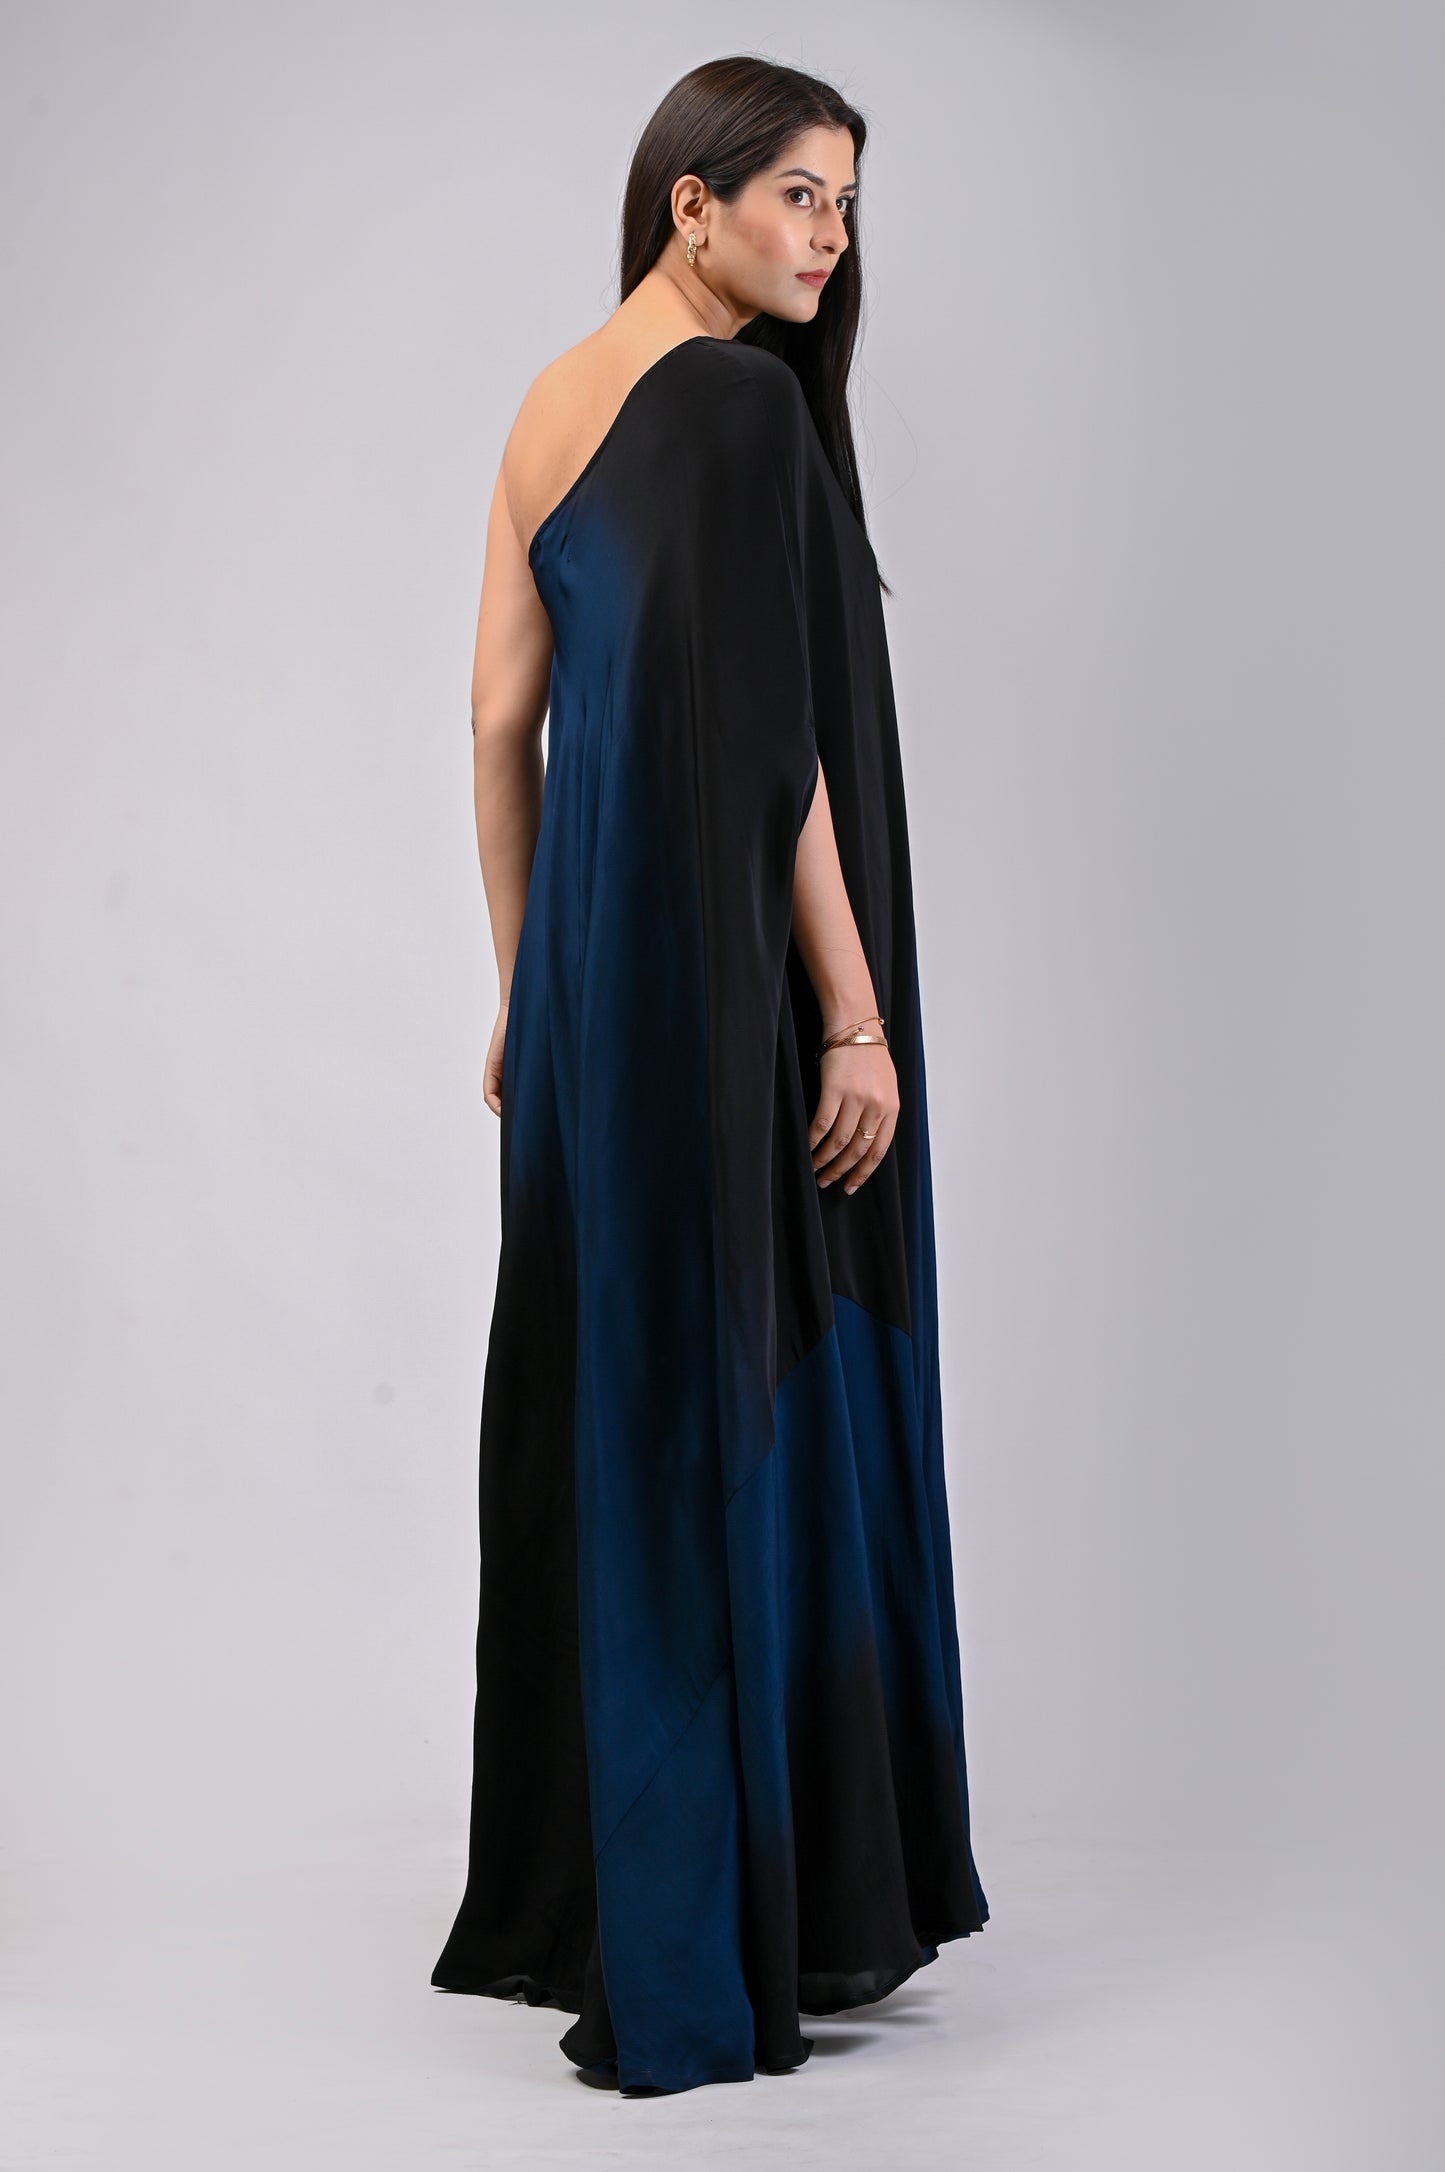 womens fashion, Blue gown, Midi Gowns, party wear gowns, cocktail dresses indian ethnic cocktail dresses cocktail dresses for women cocktail dress myntra cocktail dress meaning urbanic cocktail dress blue dress for ladies blue dress for girls blue dress party wear royal blue dress for ladies light blue dresswomenwomen western gown party wear western gown party wear for wedding western gown party wear for ladies western gown party wear western party wear indo western gown party wear